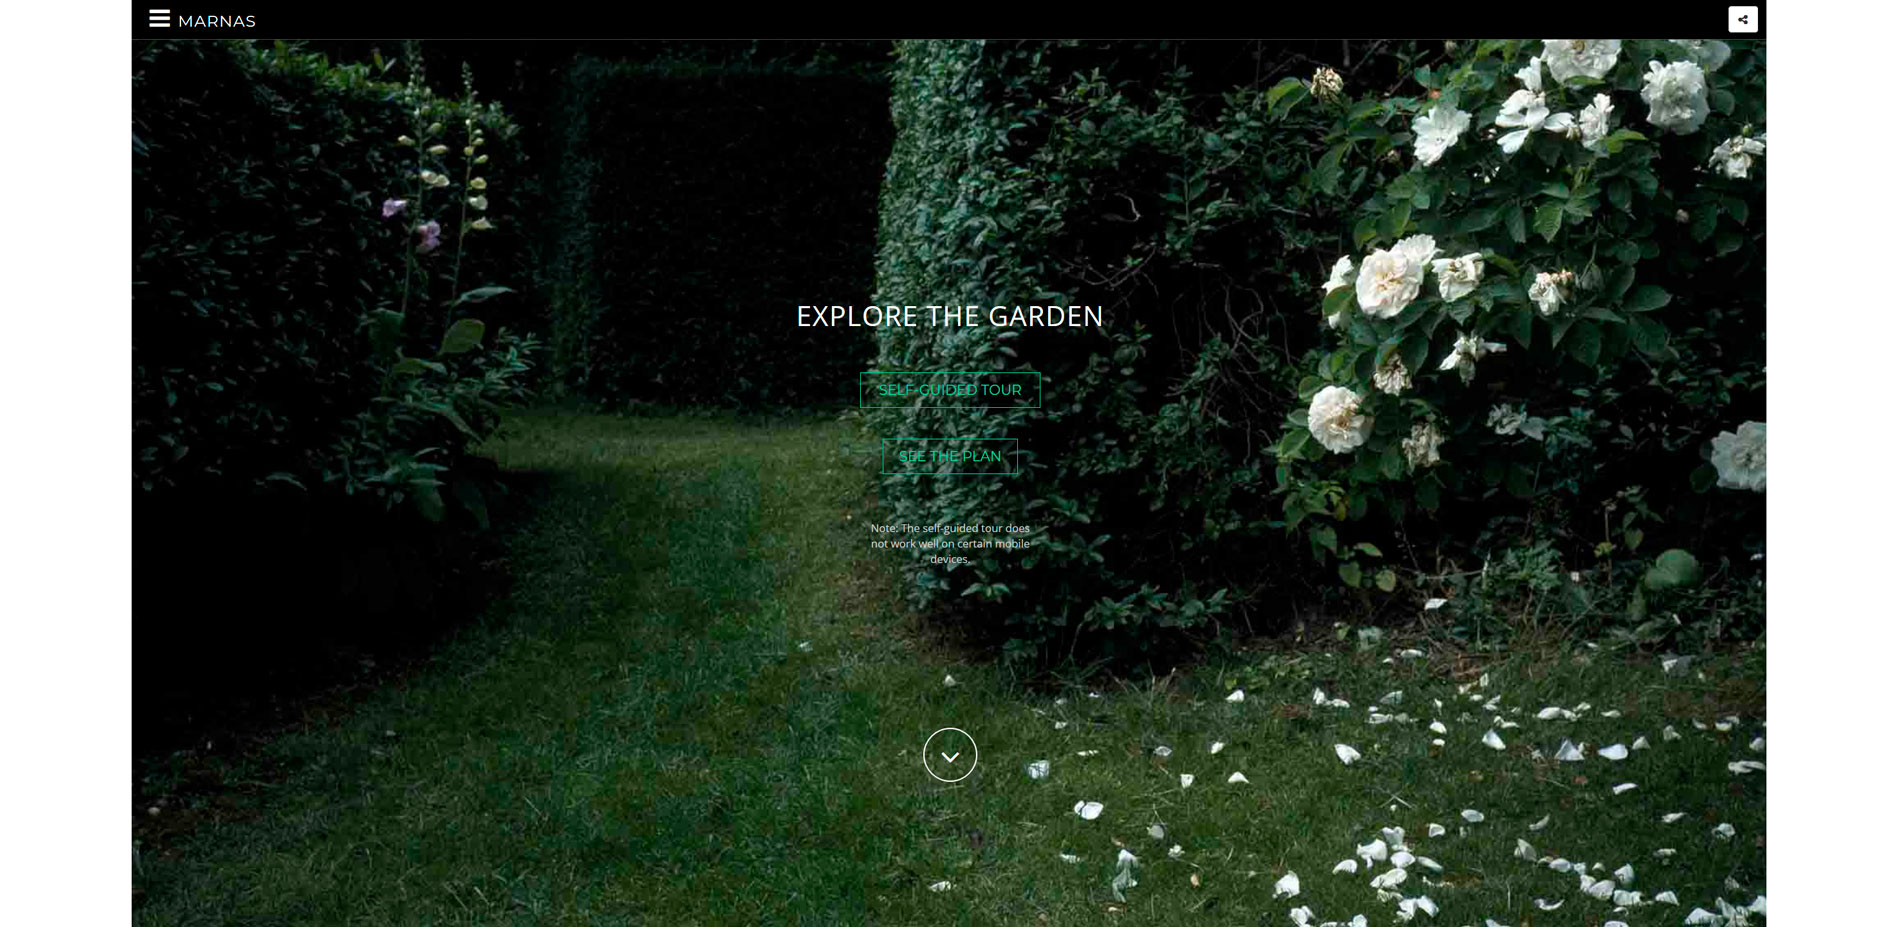 Explore the Garden is an invitation to wander around the garden on your own. There are hundreds of possible paths to choose from. This network was cre…